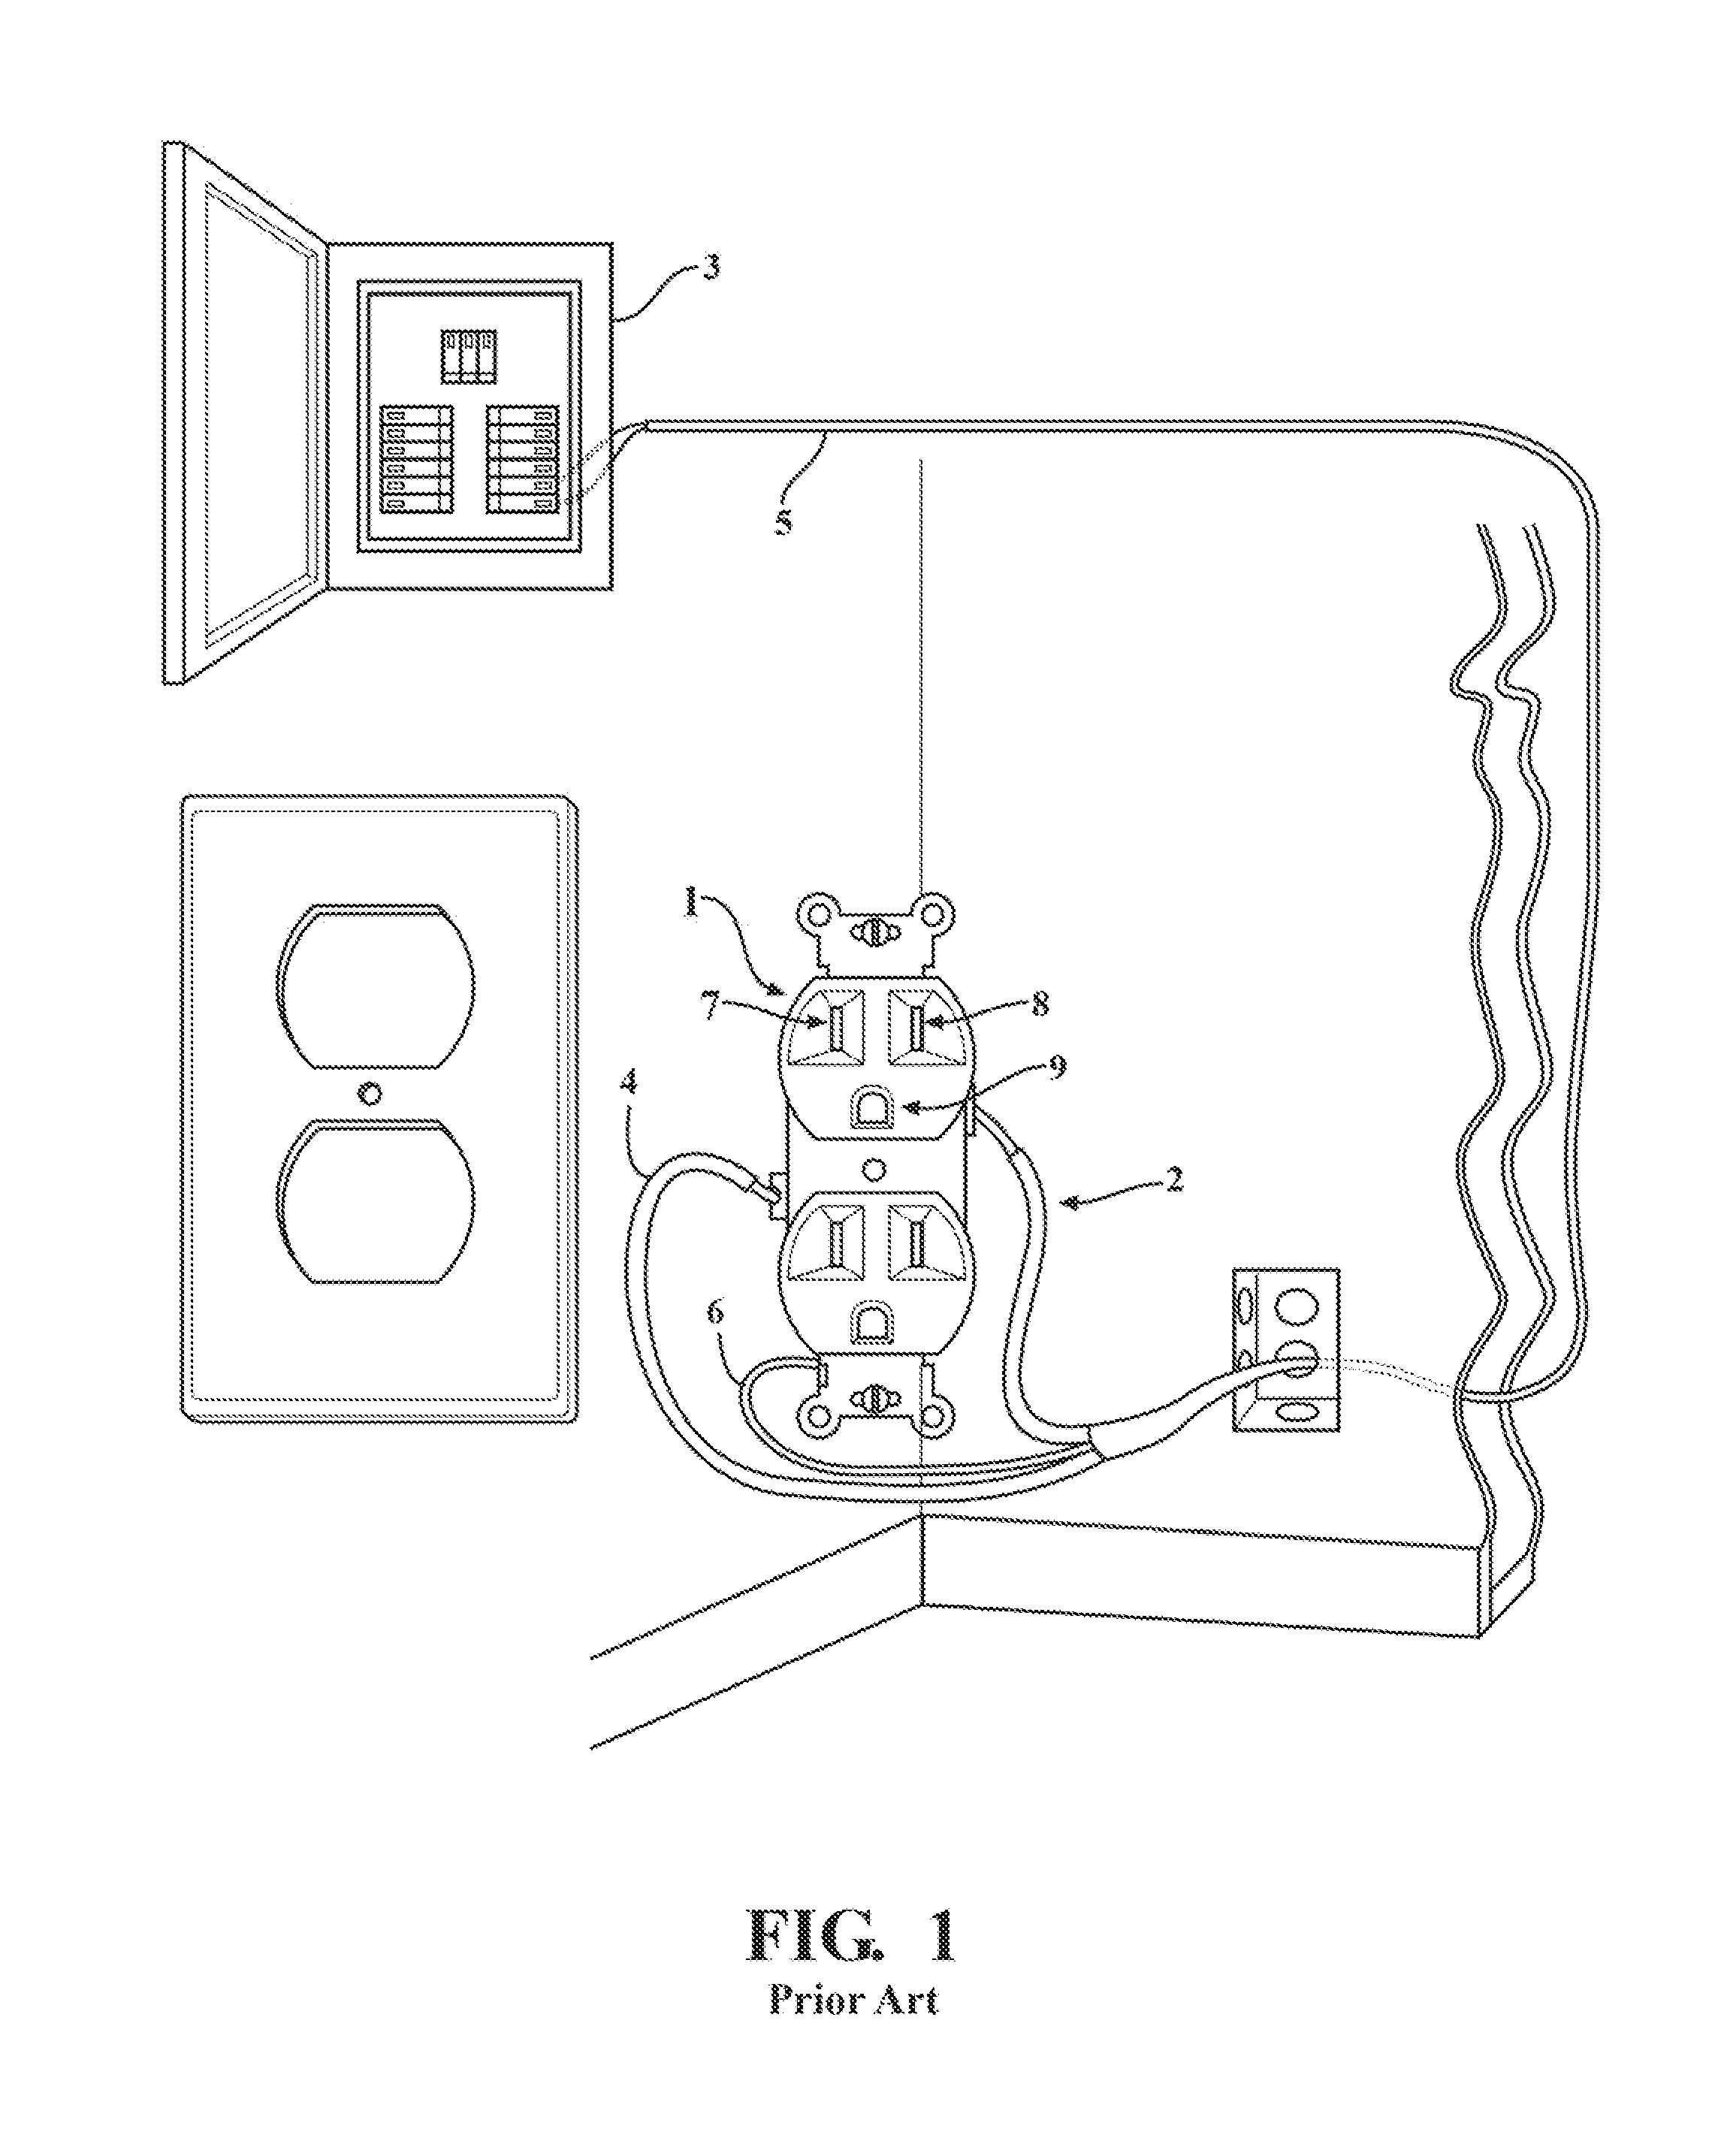 System and method for monitoring an electrical device